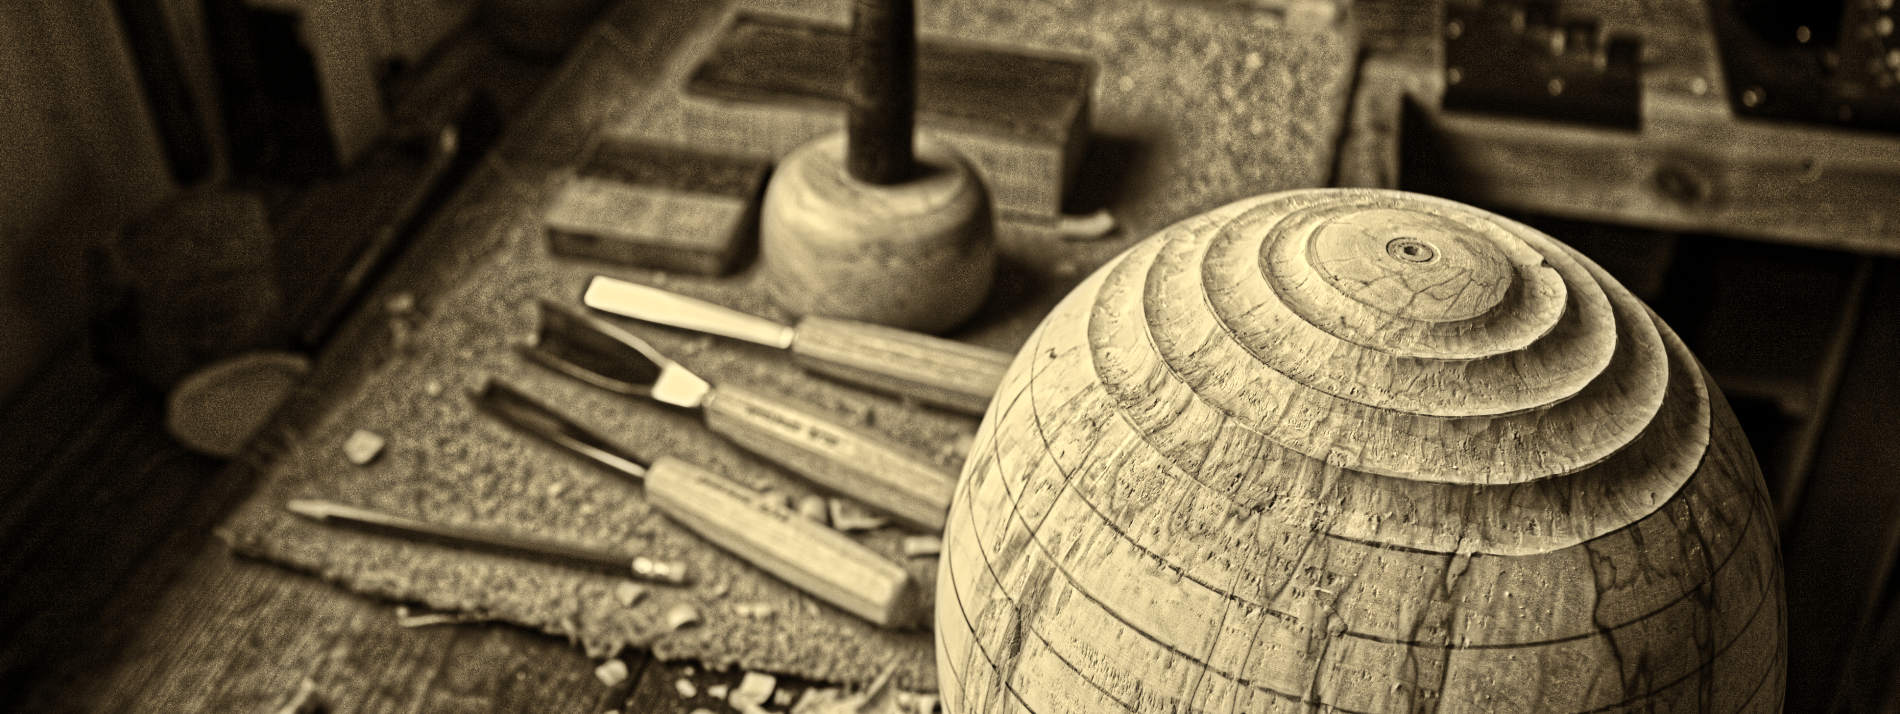 Sycamore sphere, tools on workbanch